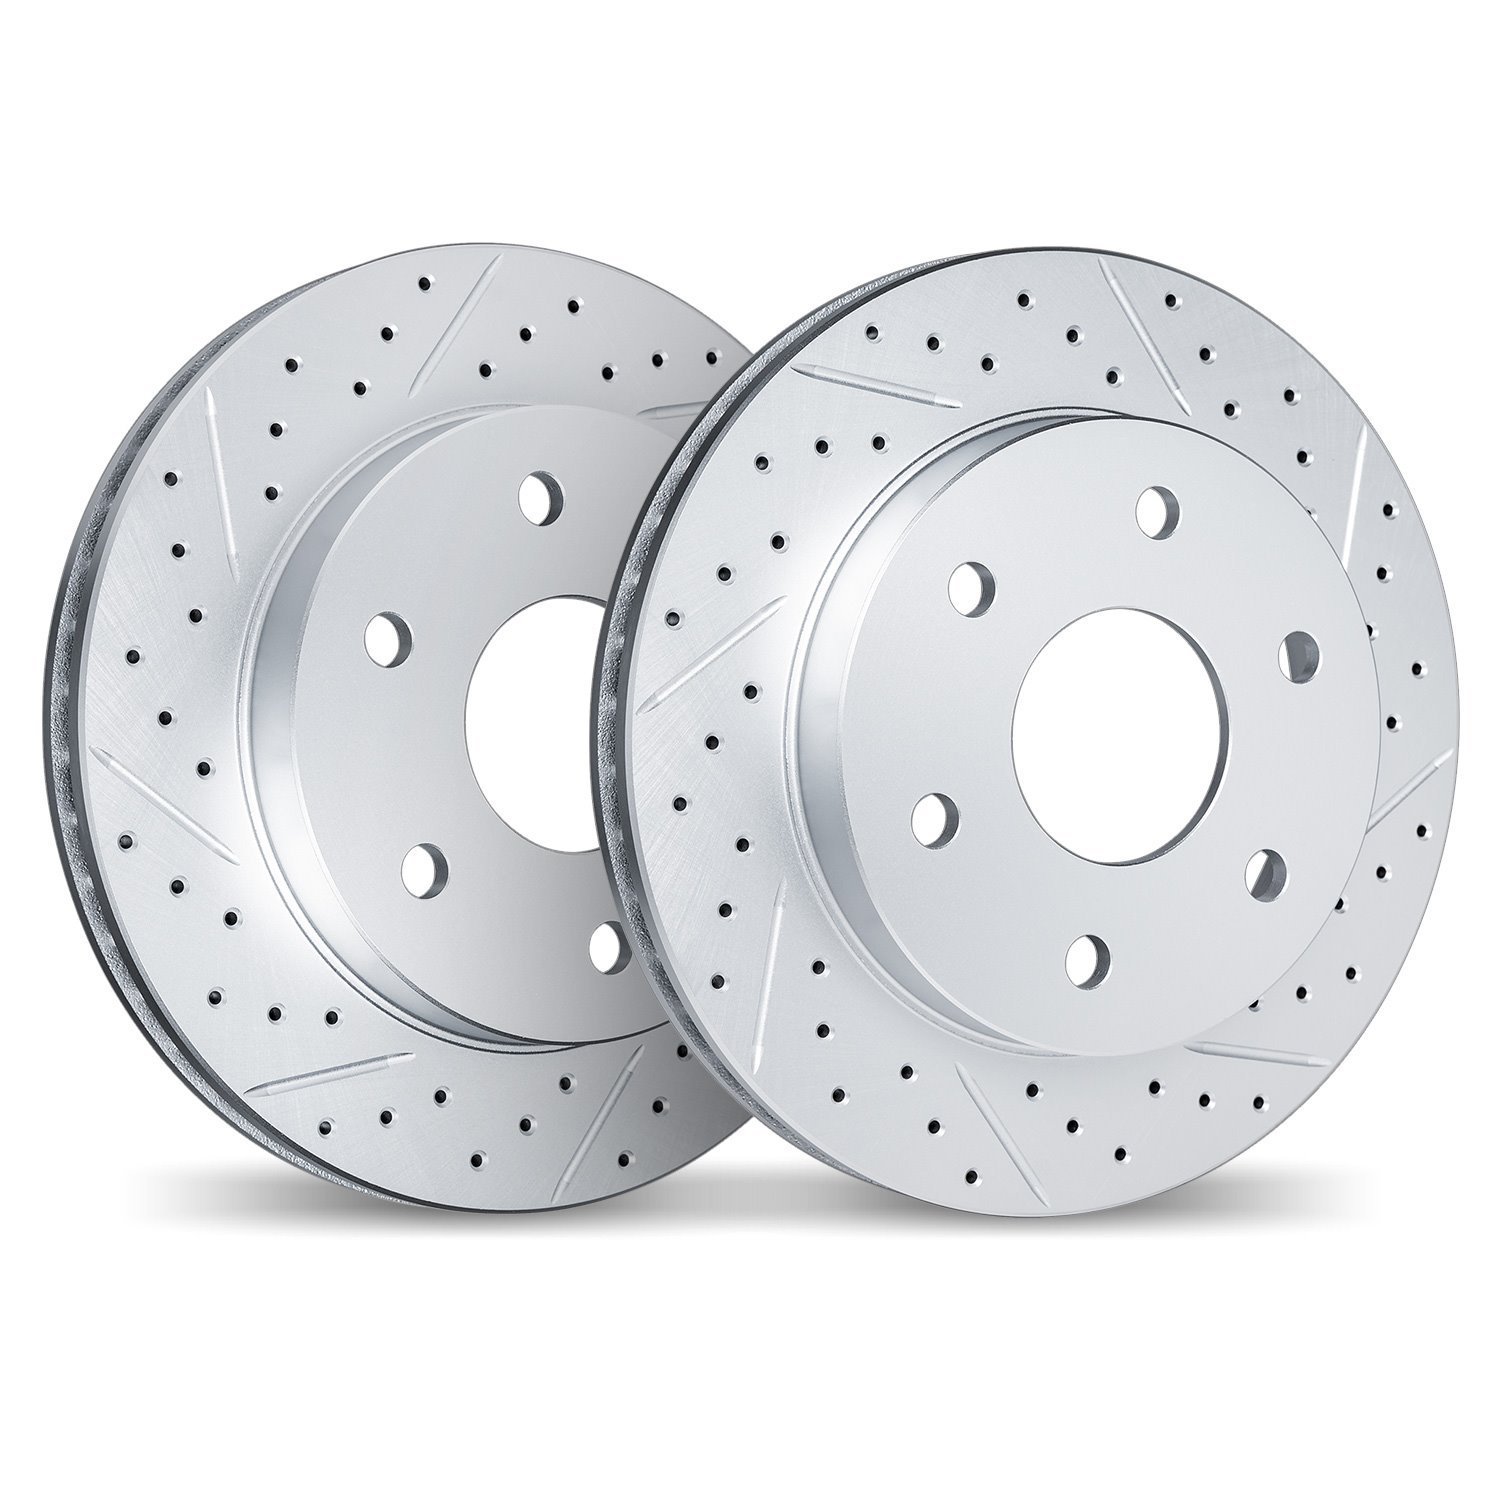 2002-67062 Geoperformance Drilled/Slotted Brake Rotors, Fits Select Infiniti/Nissan, Position: Rear